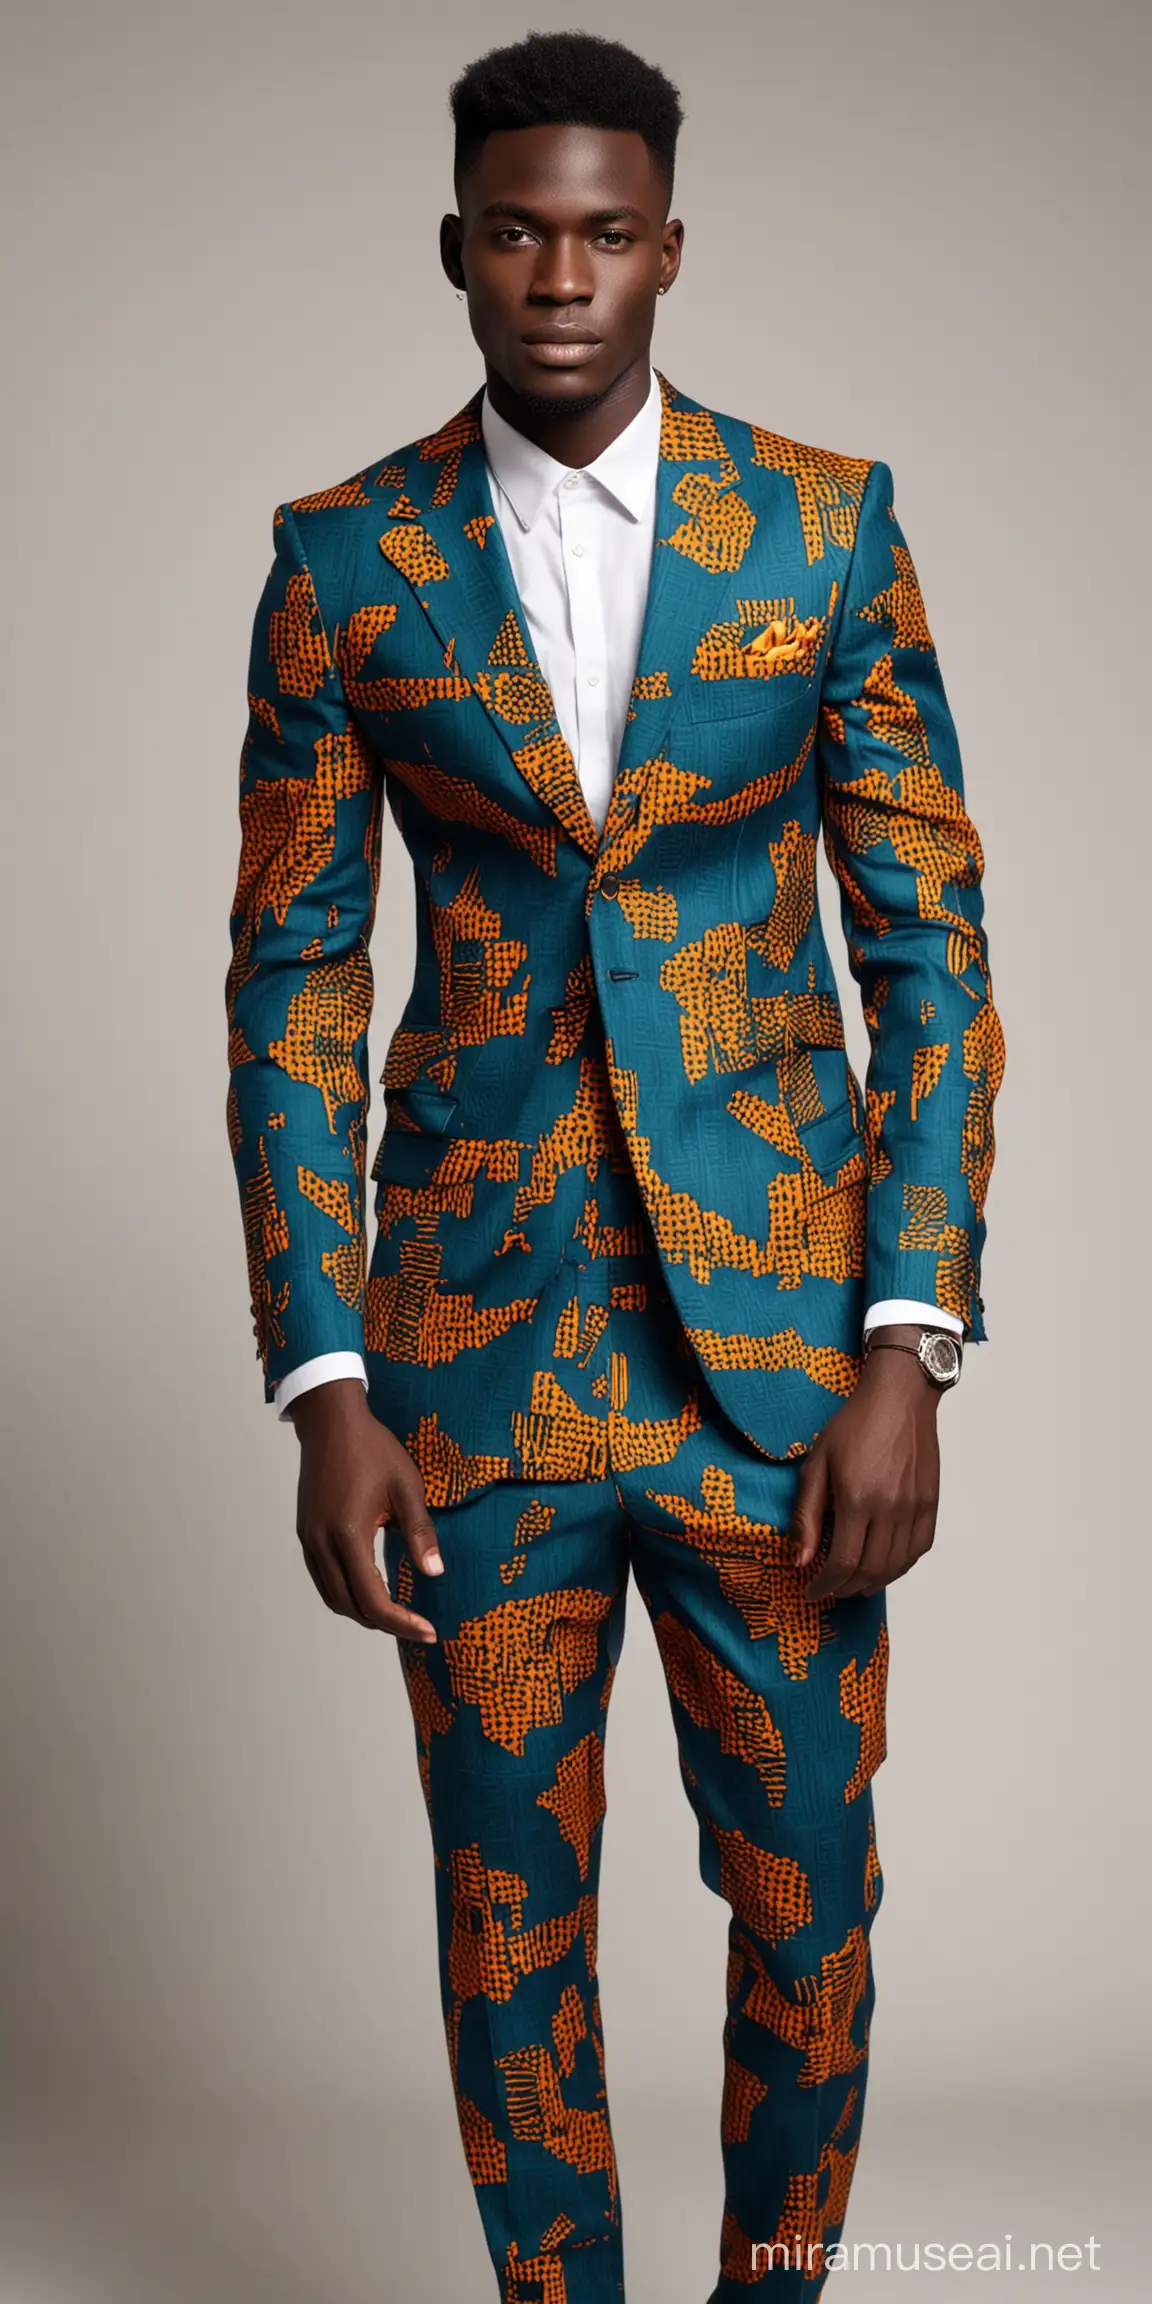 Stylish African Male Model in Ghanaian Print Suit